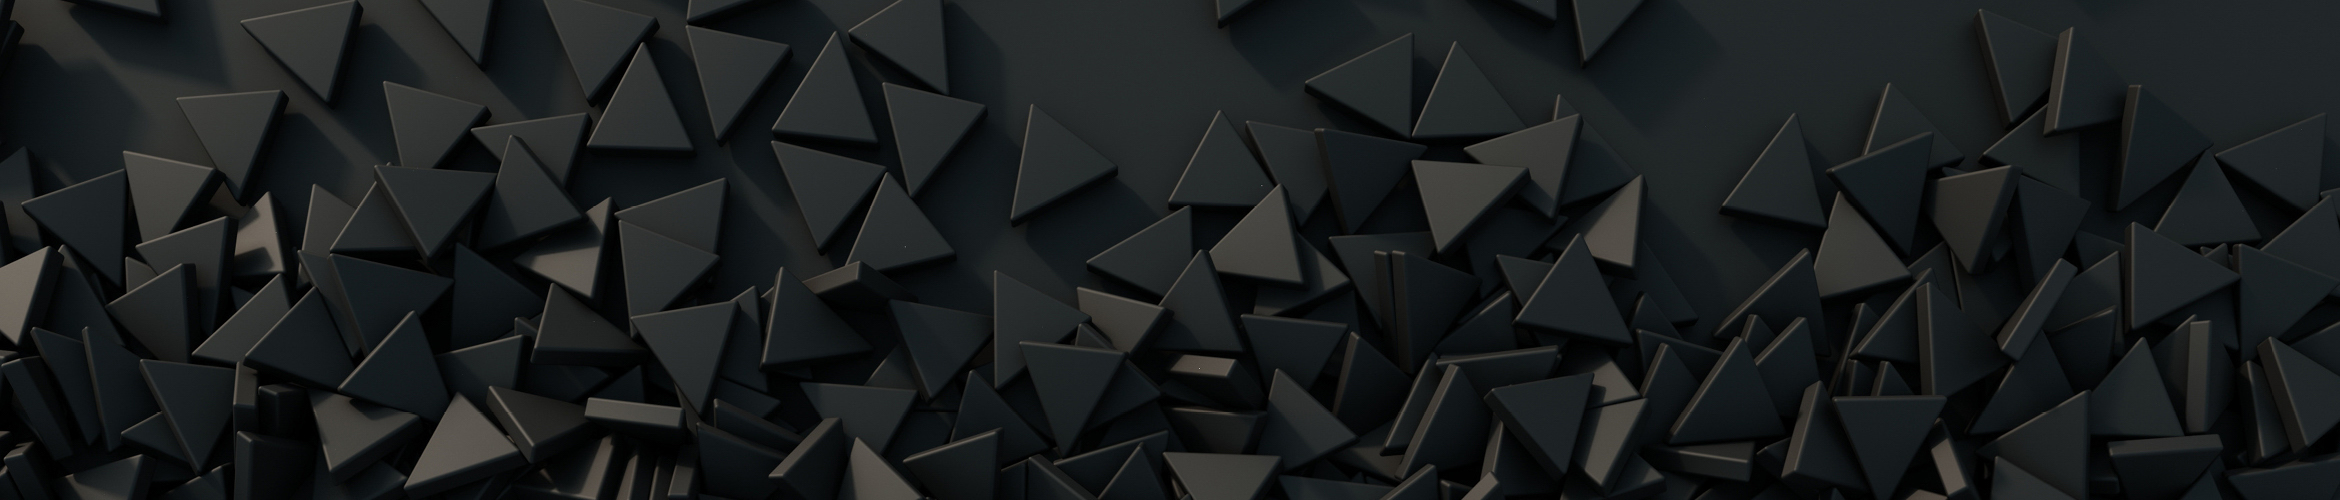 2340x500 Black triangles grouped together